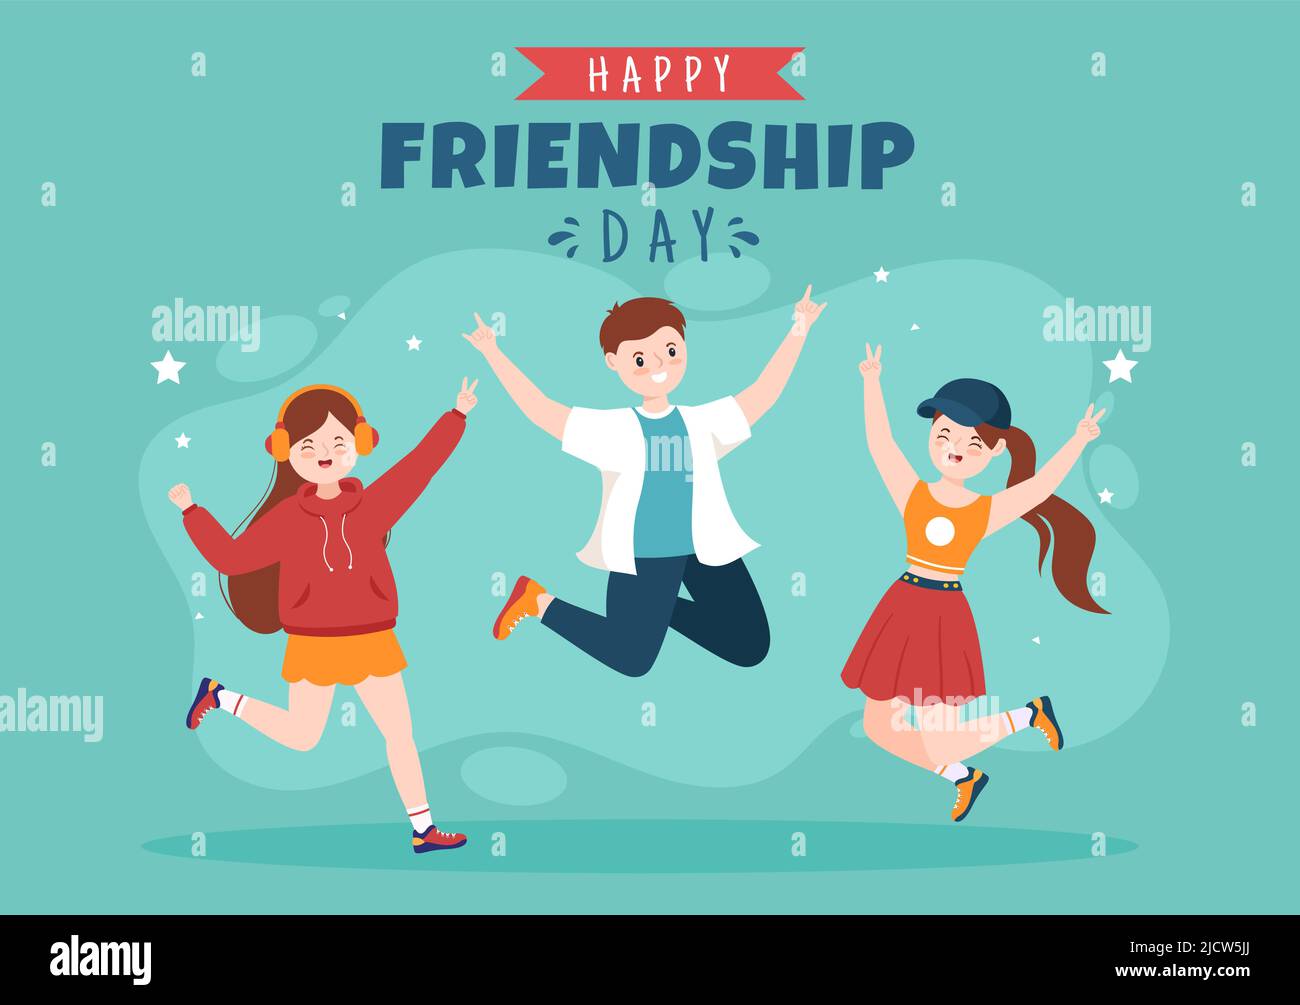 Happy Friendship Day Cute Cartoon Illustration with Young Boys and ...